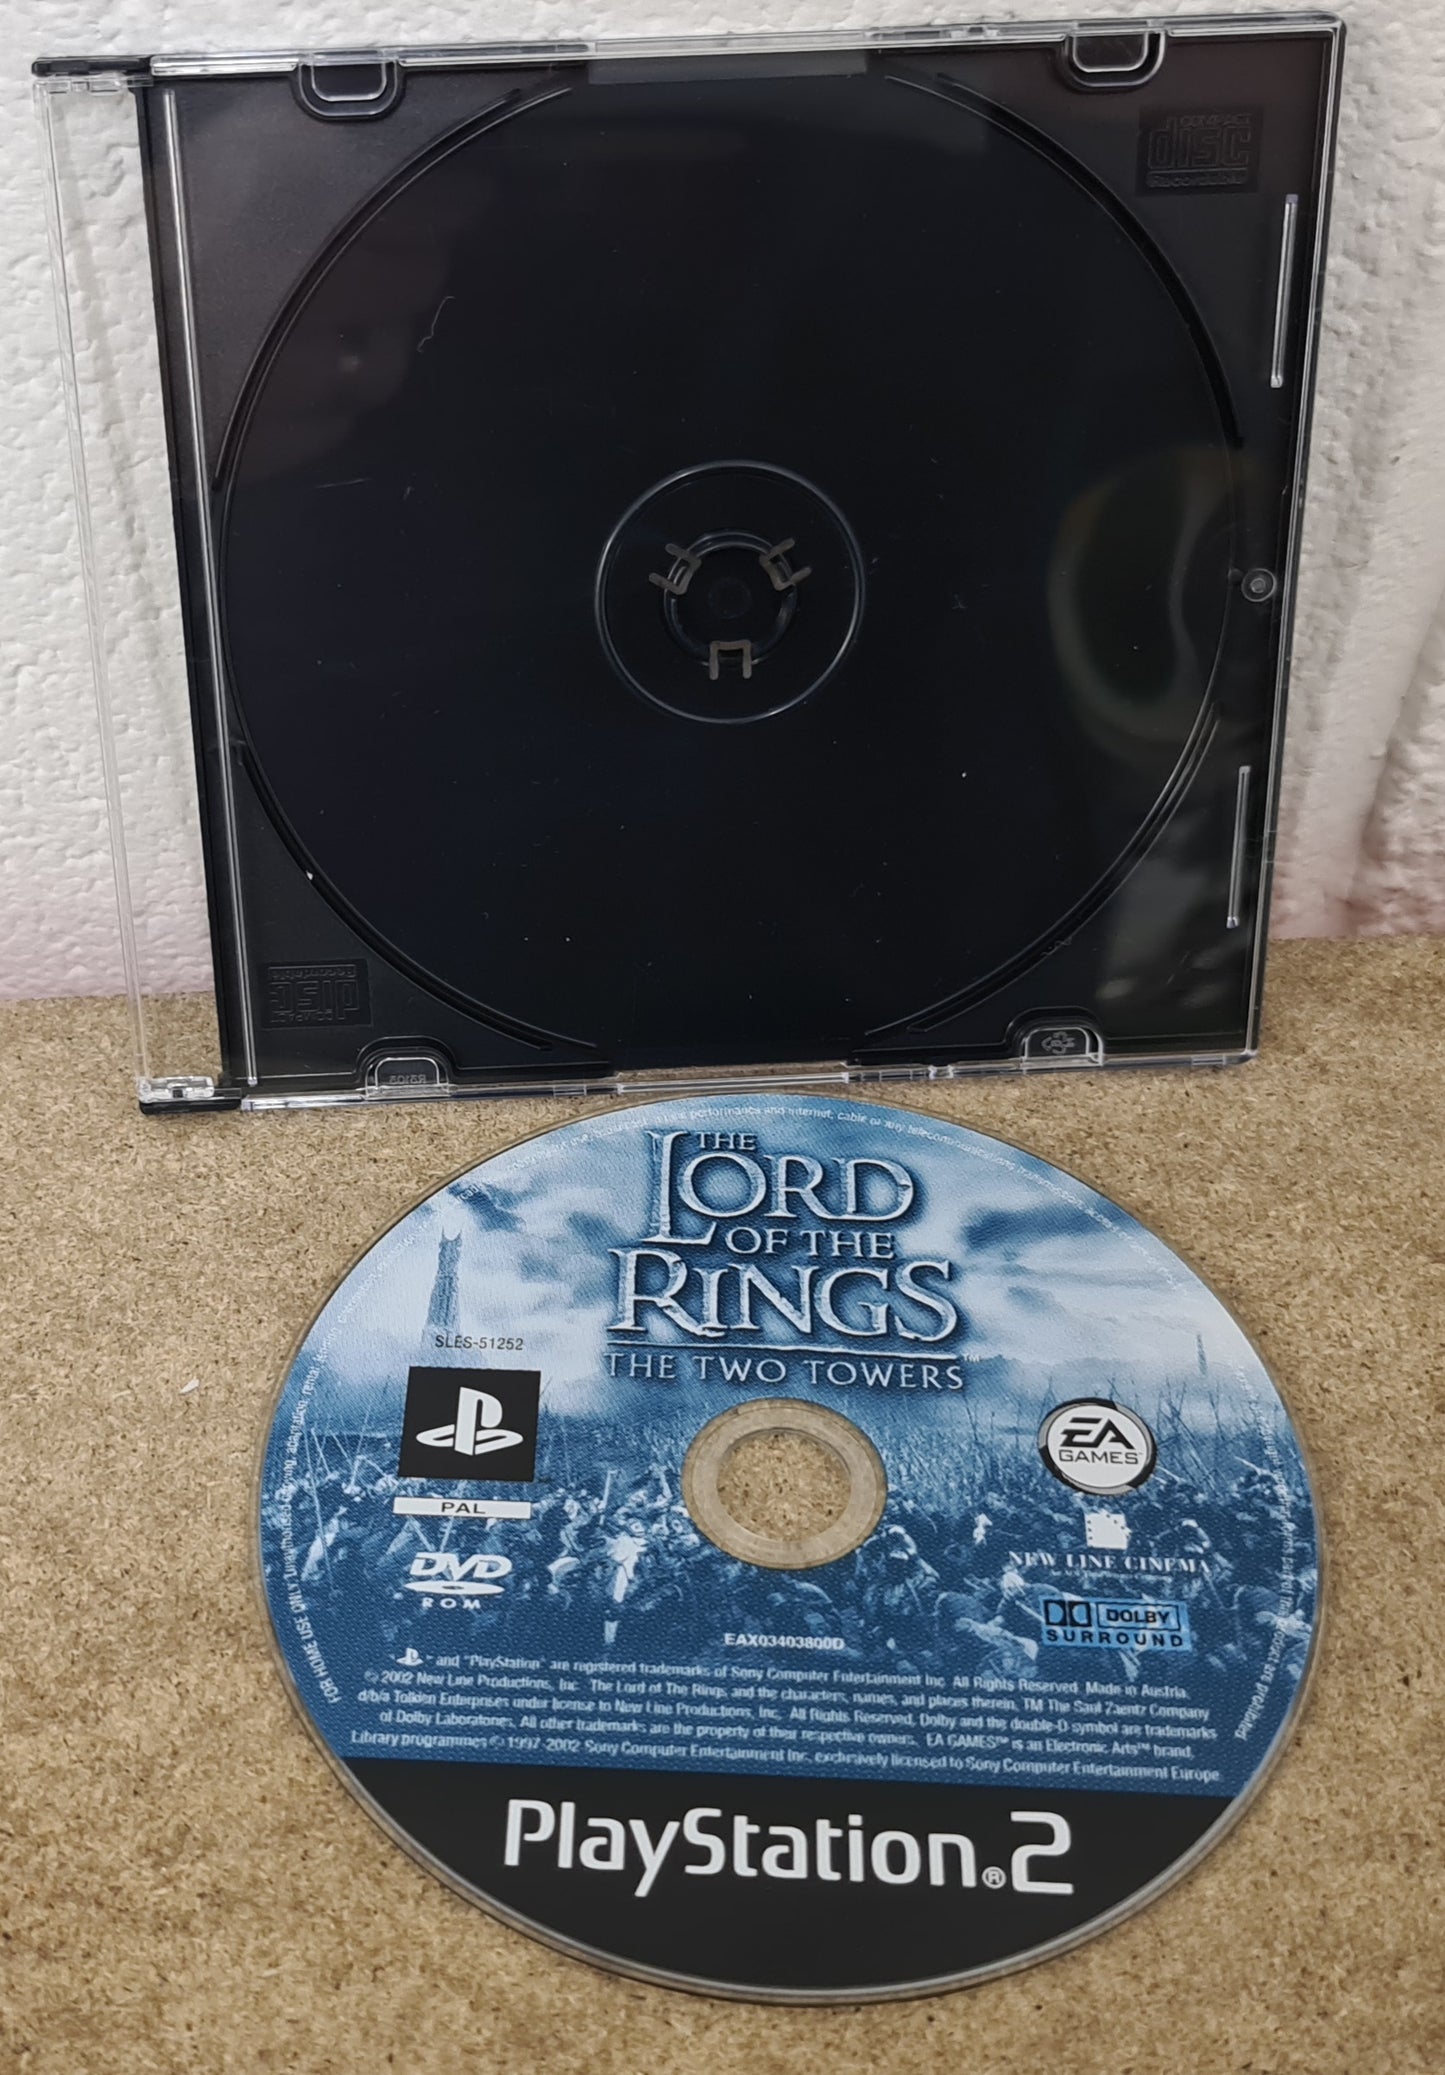 The Lord of the Rings the Two Towers Sony Playstation 2 (PS2) Game Disc Only